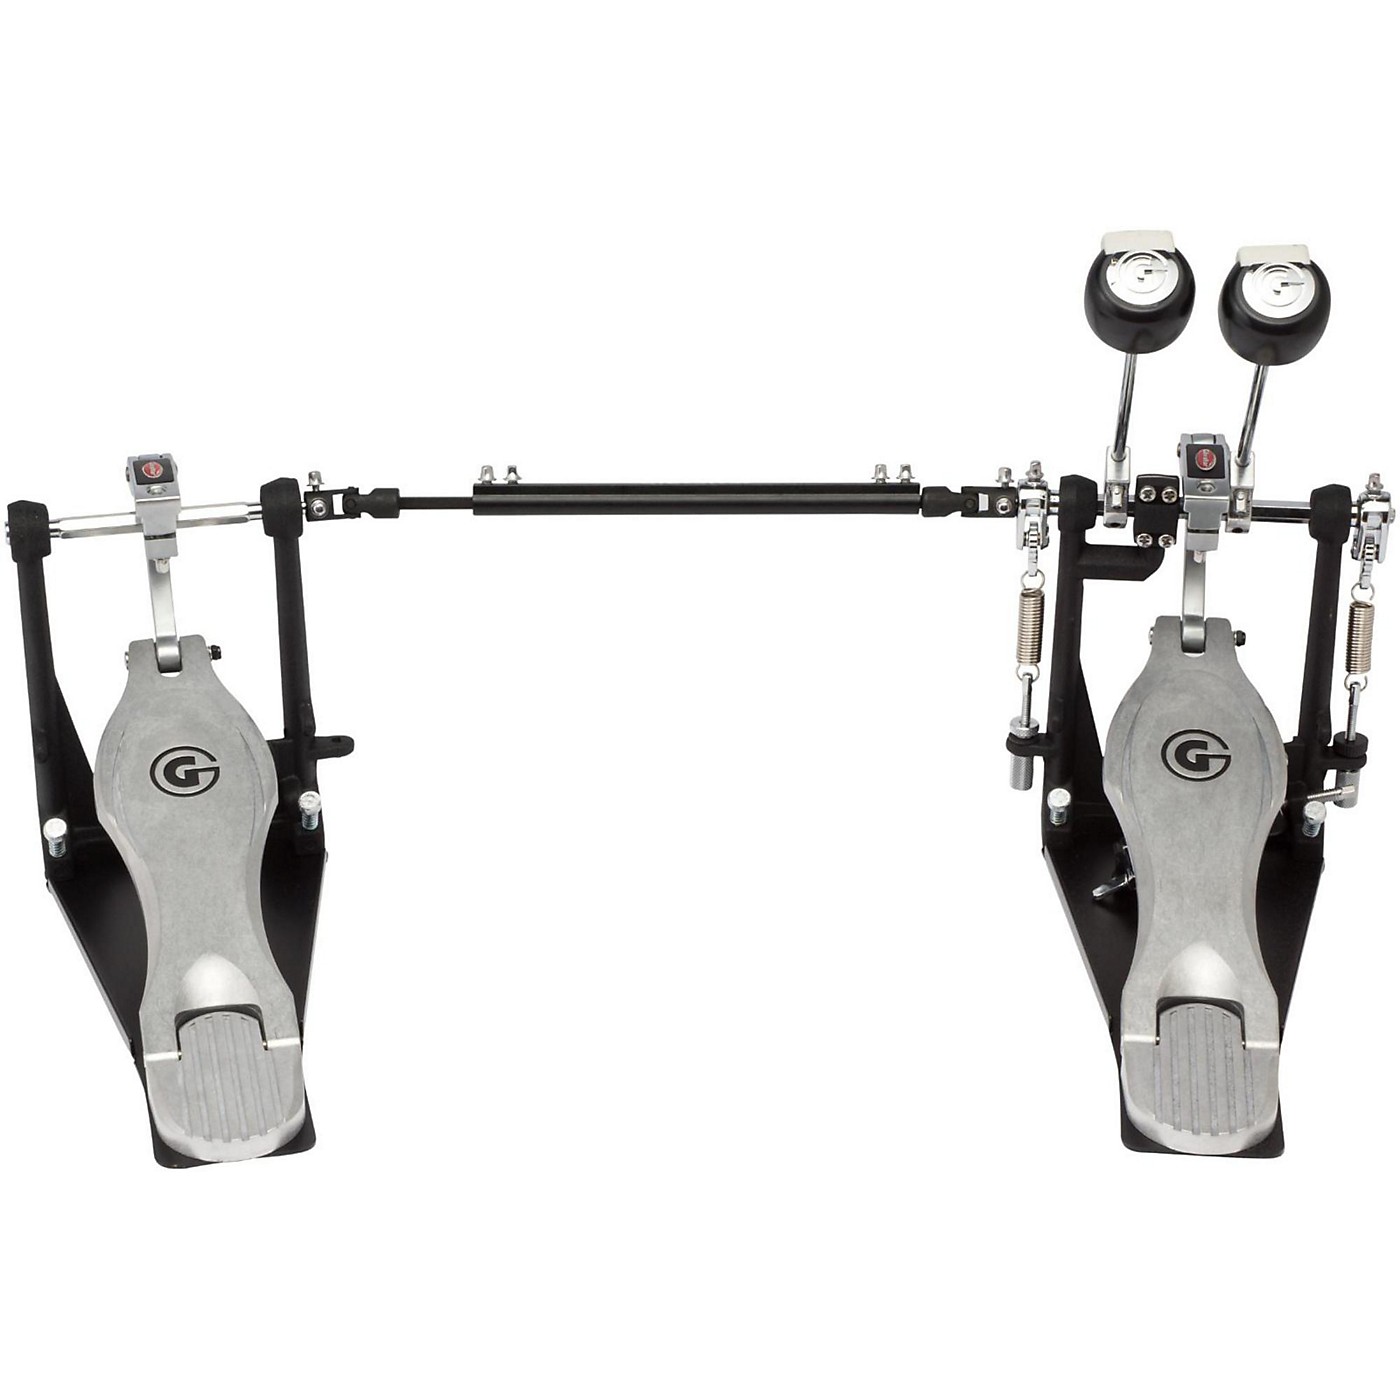 Gibraltar 6700 Series Direct Drive Double Bass Drum Pedal thumbnail